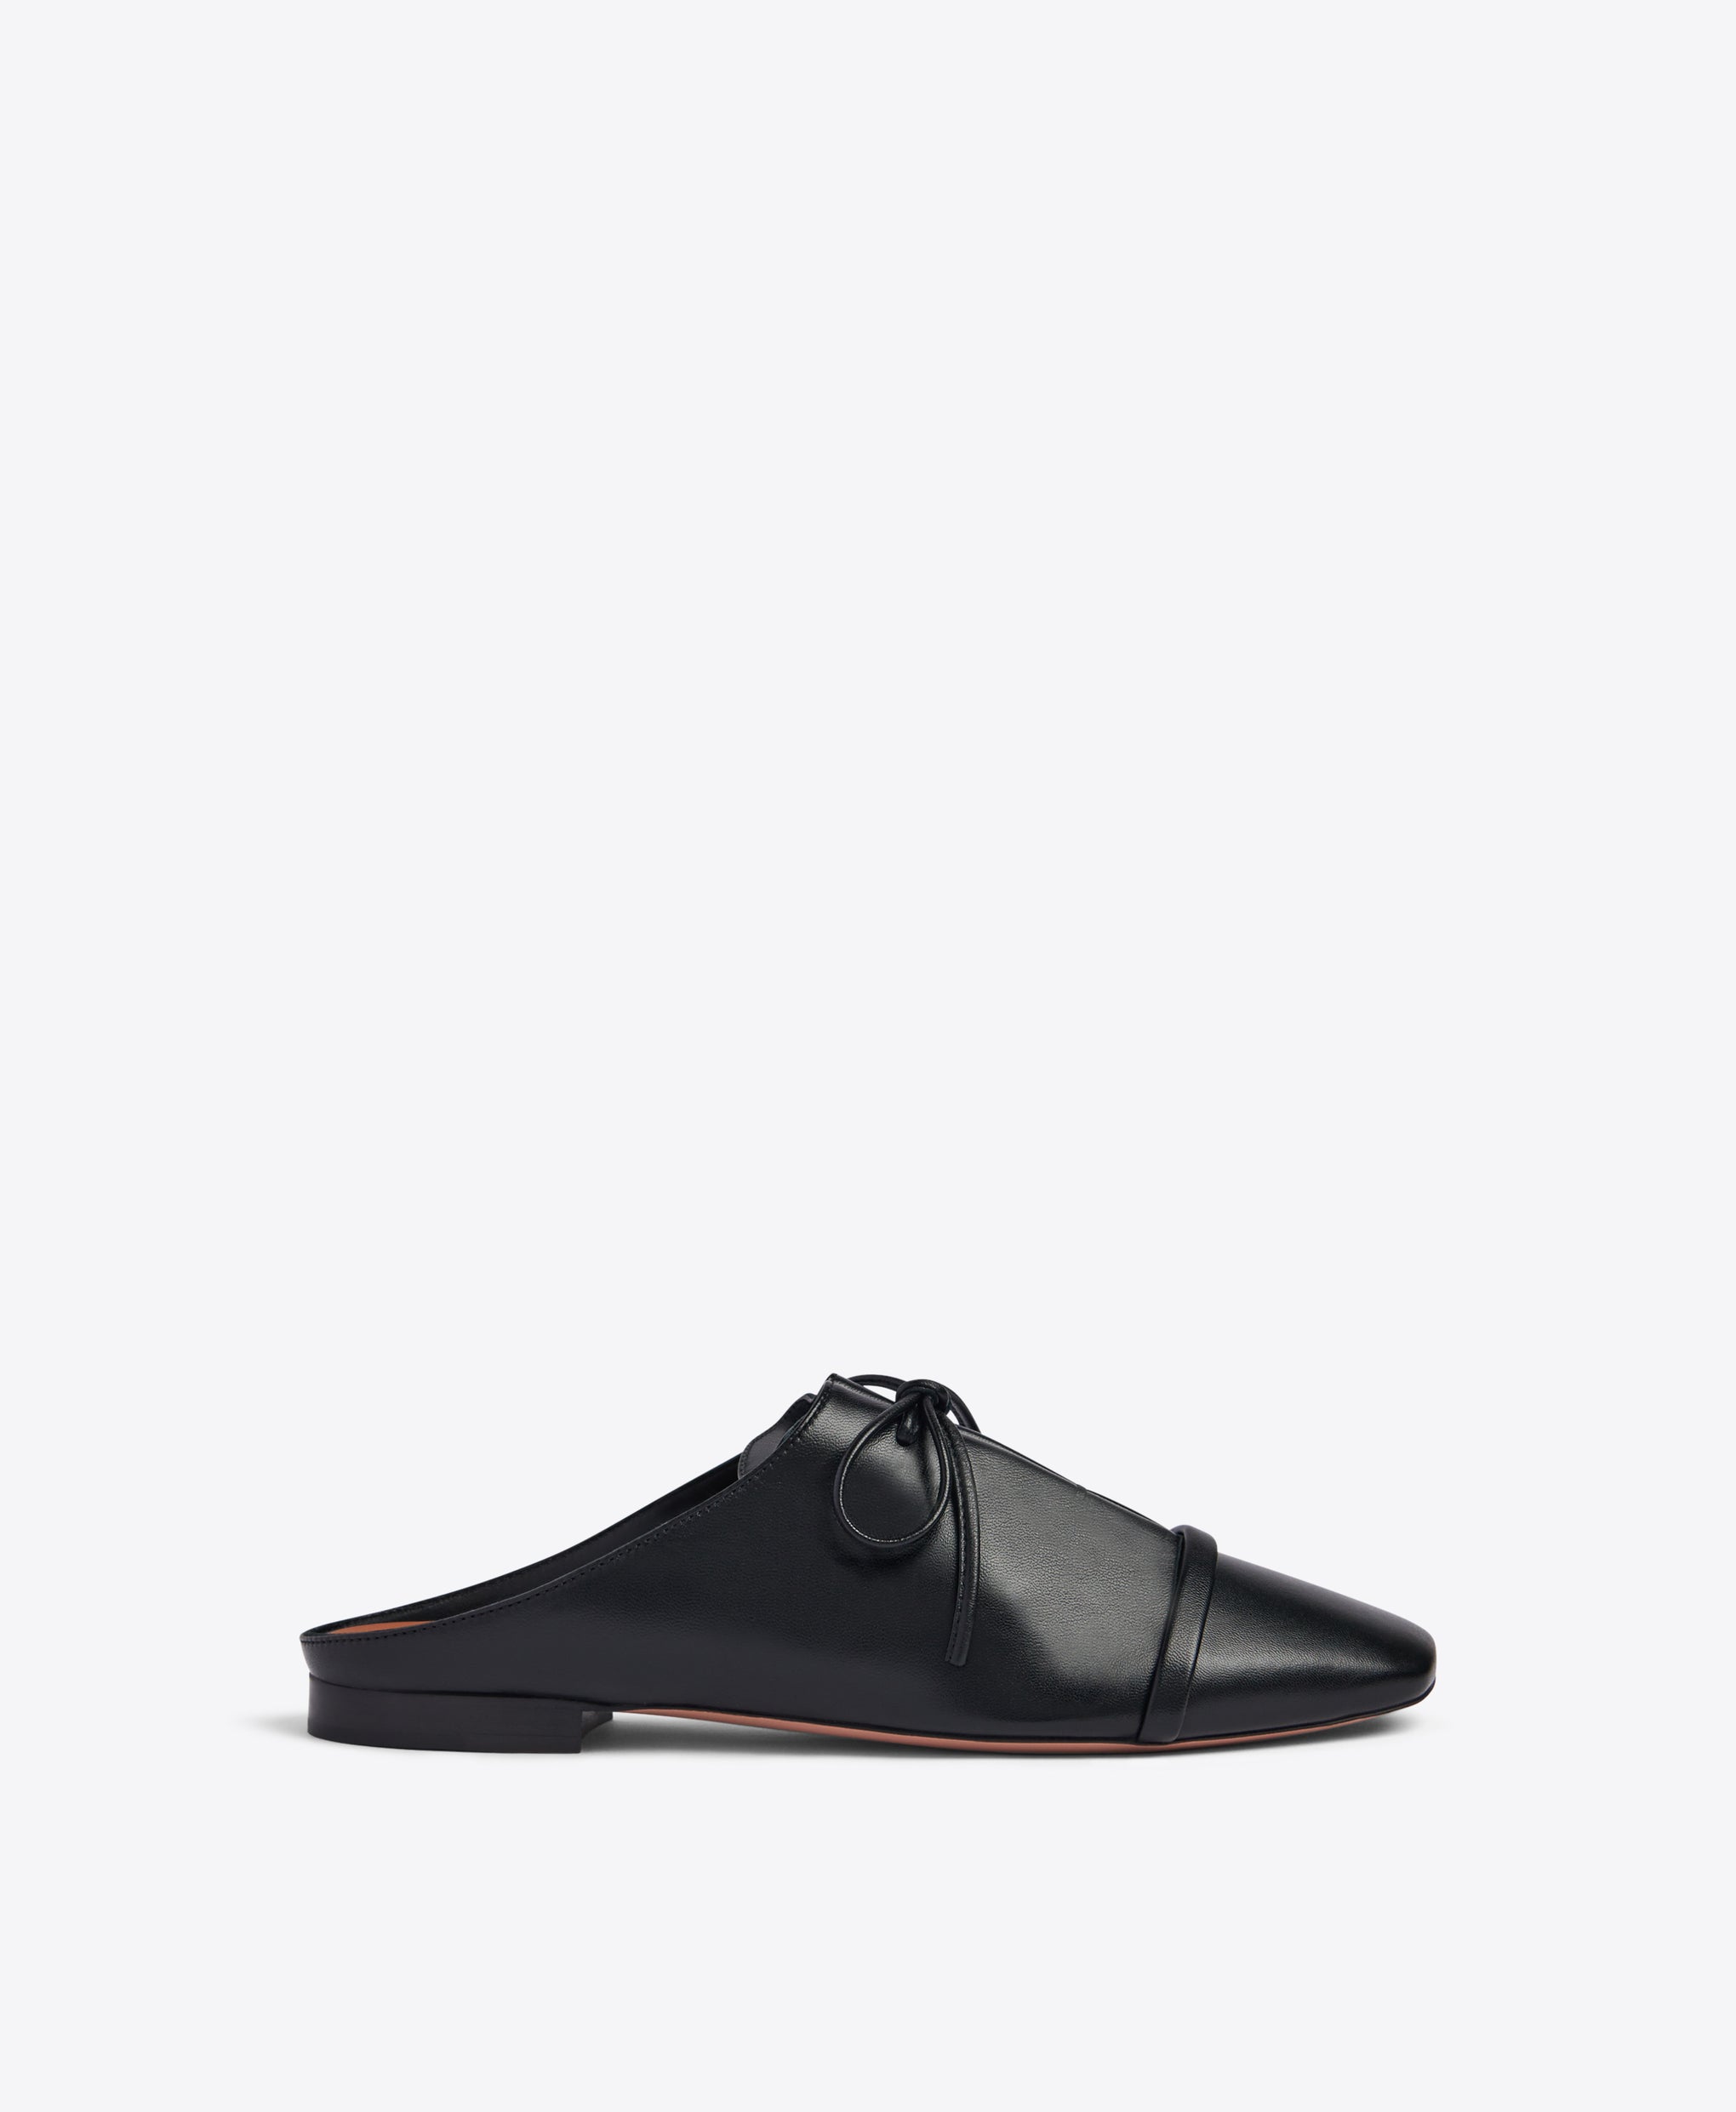 Malone Souliers Jacqueline Black Leather Flat Mules